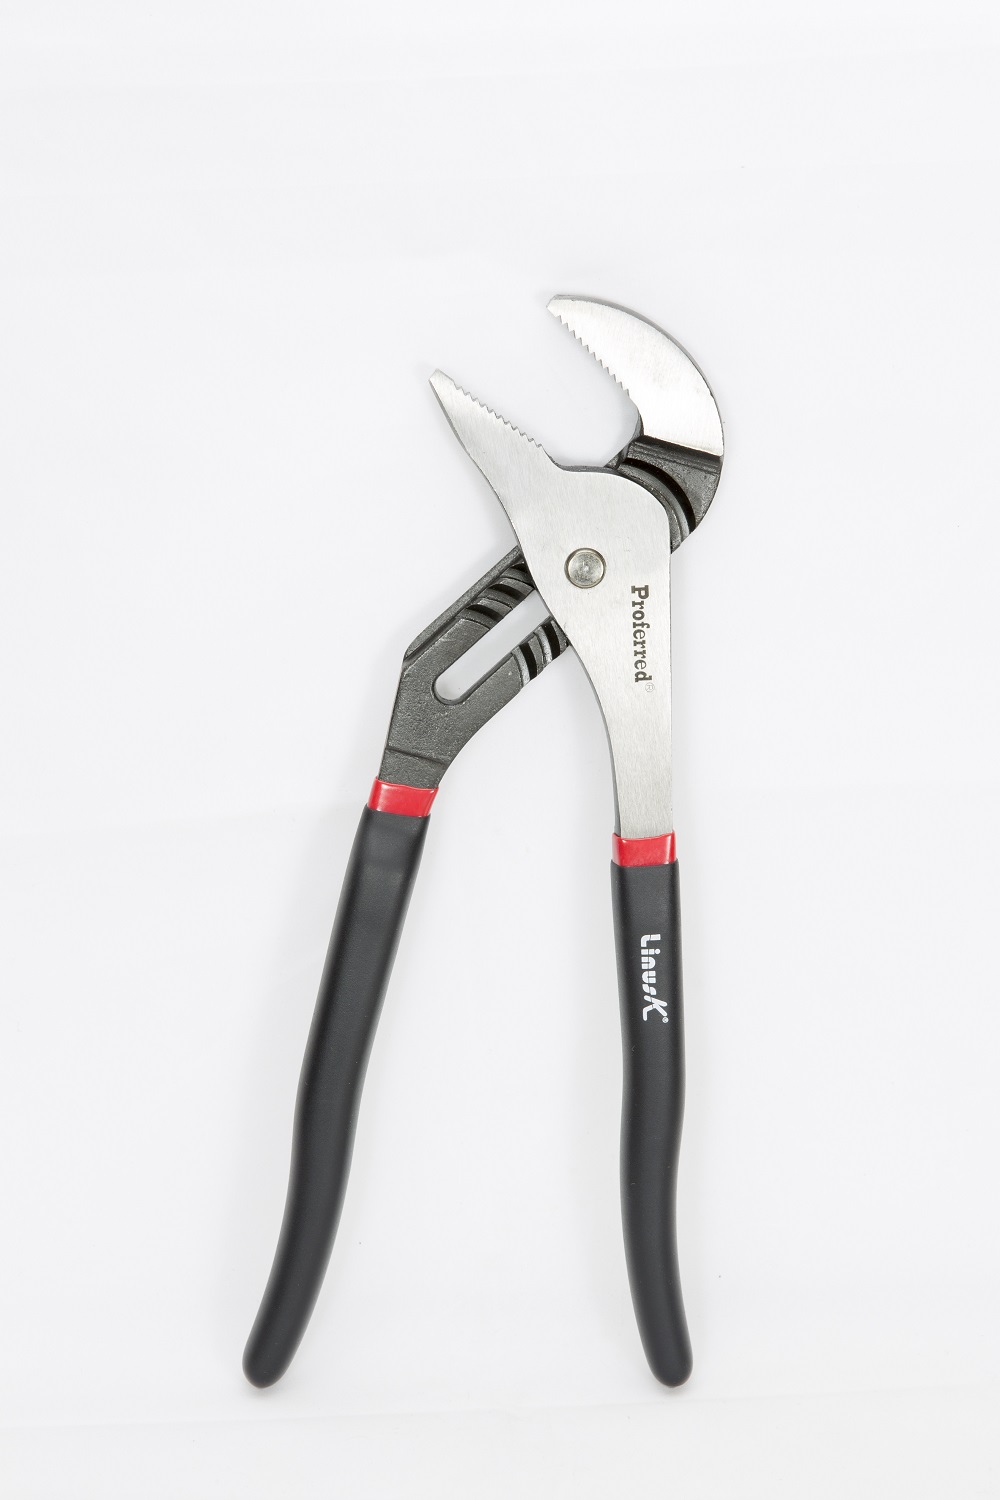 PROFERRED PLIERS STRAIGHT JAW GROOVE JOINT COATED GRIP 12'' 